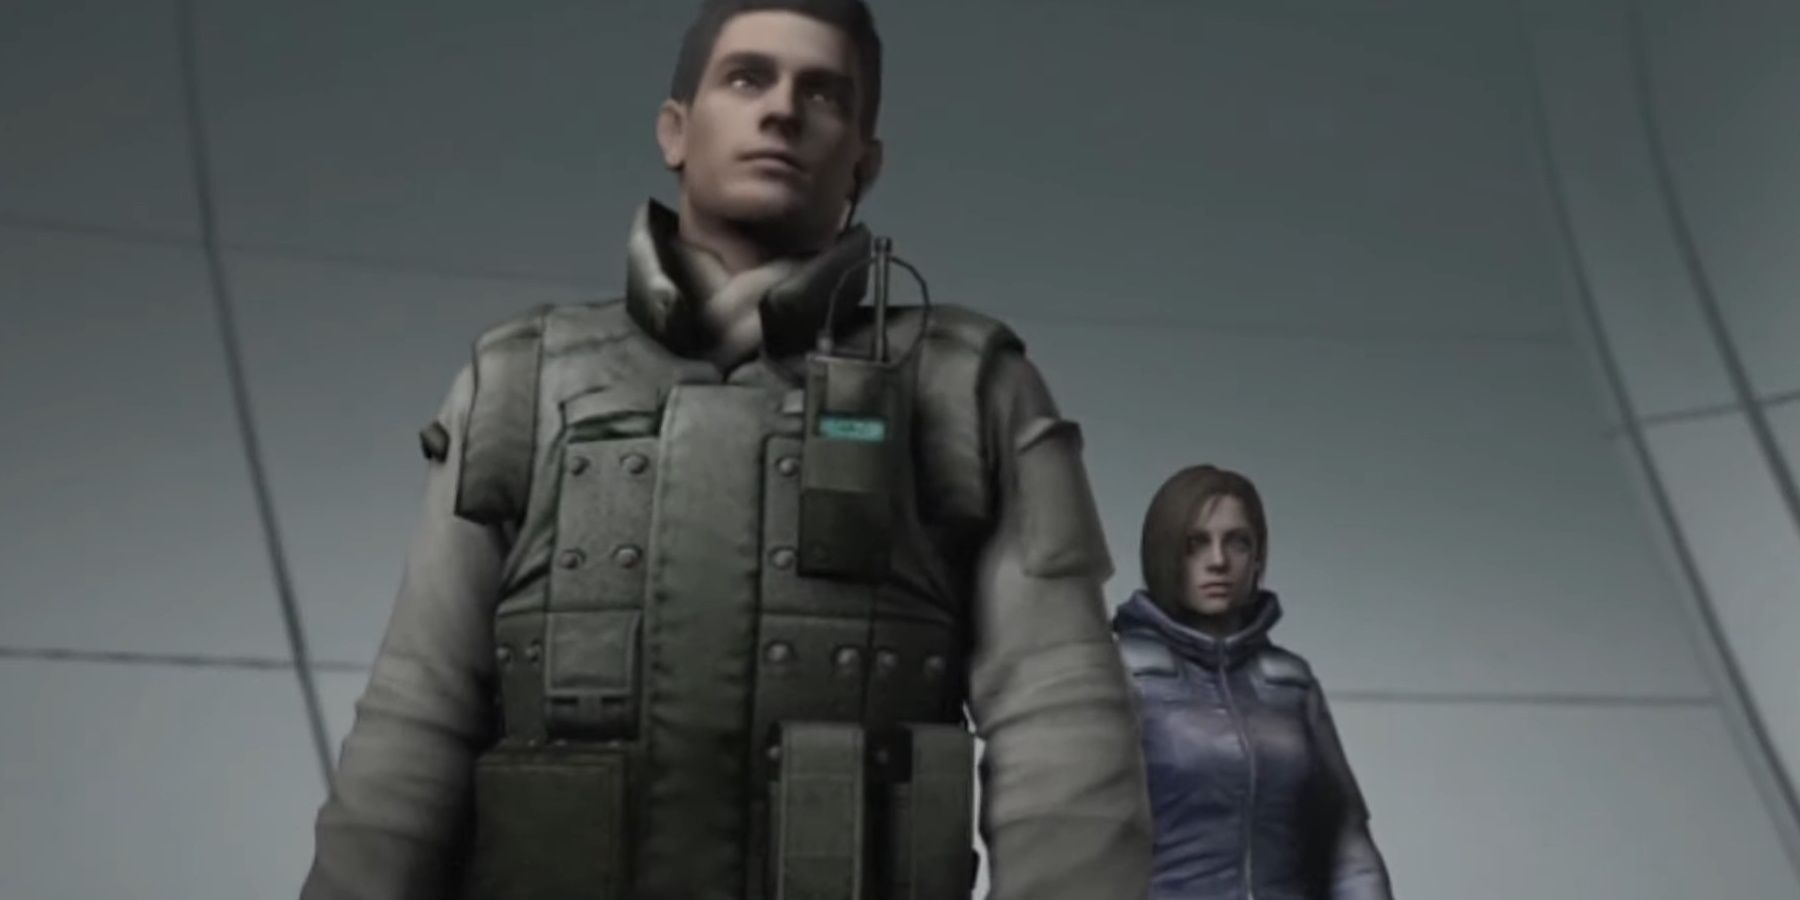 Chris and Jill near the end of Umbrella's End from Resident Evil: The Umbrella Chronicles.